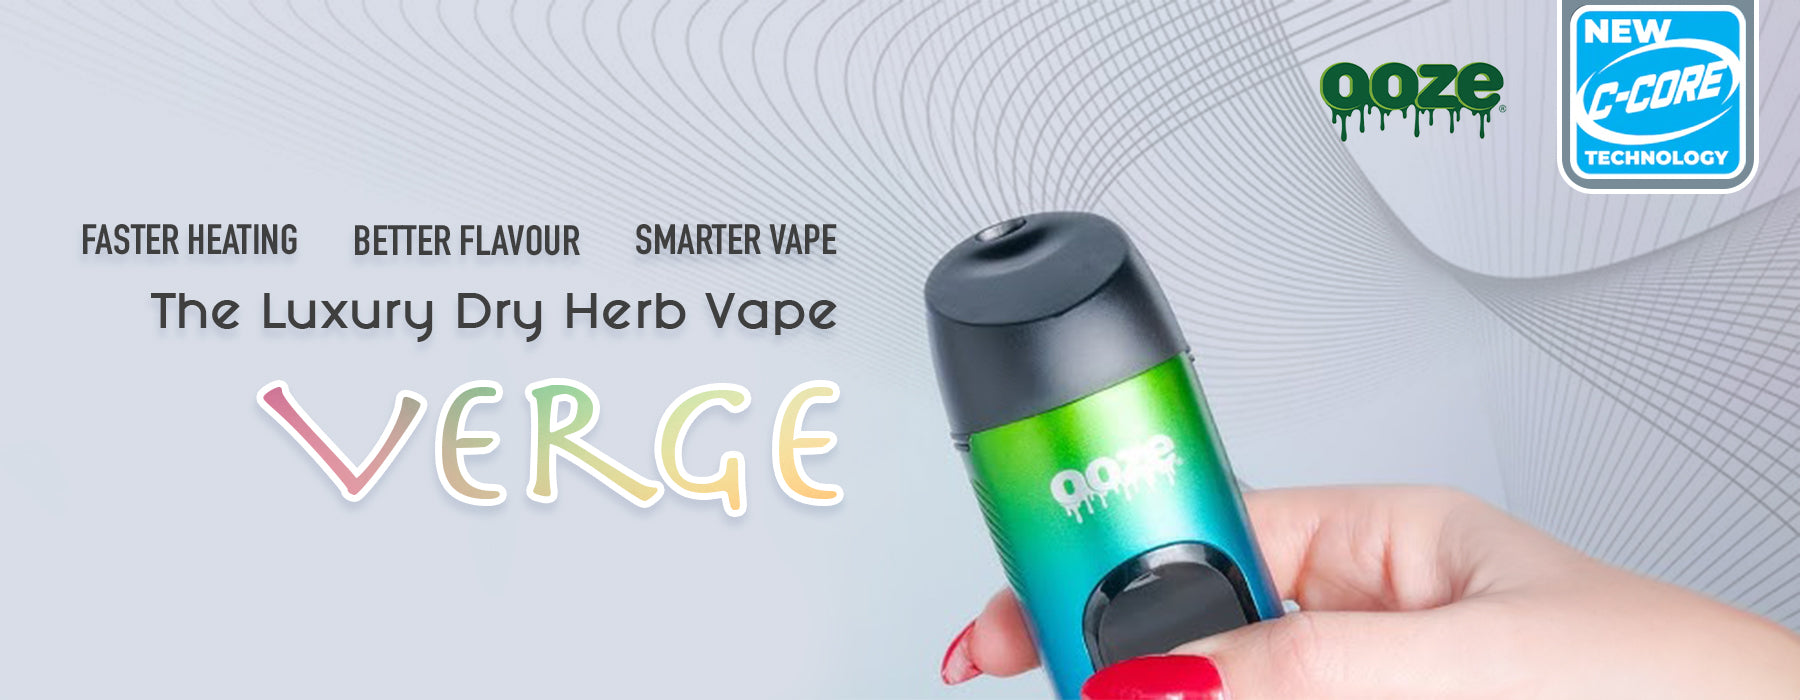 bong outlet canada ooze verge main banner